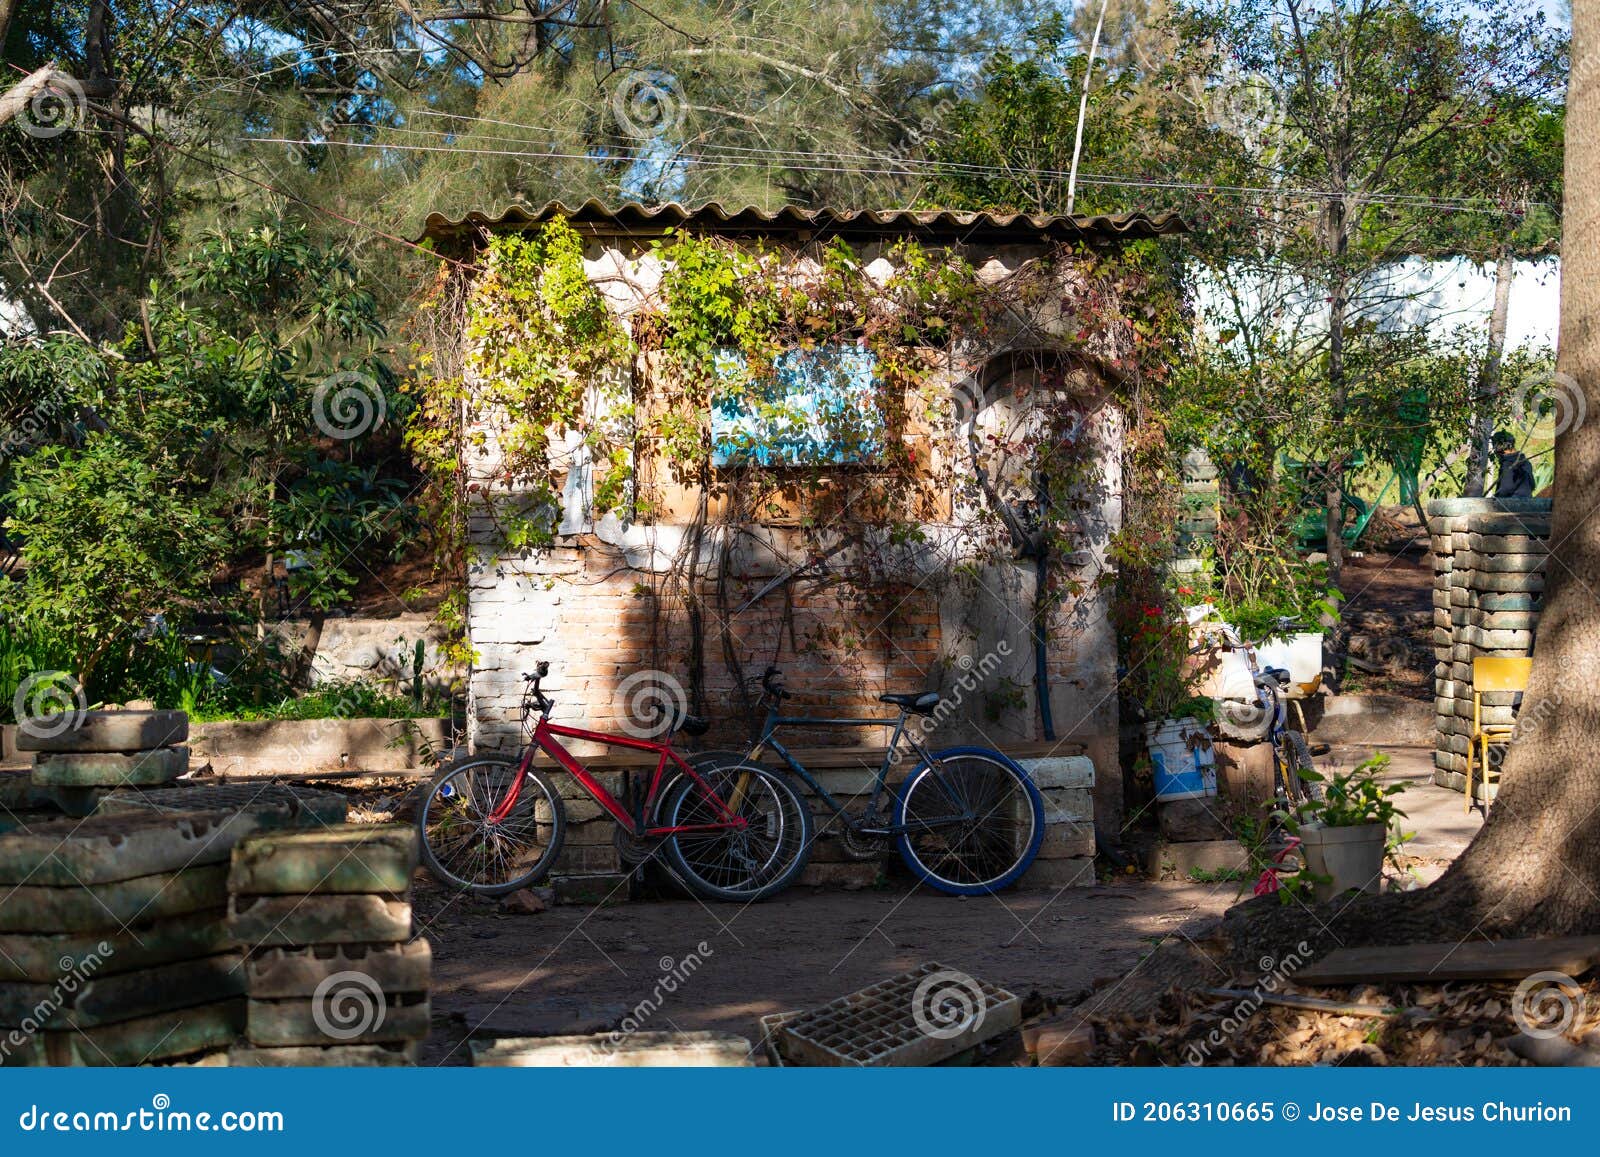 bicycles are in front of the rustic house surrounded by plants.